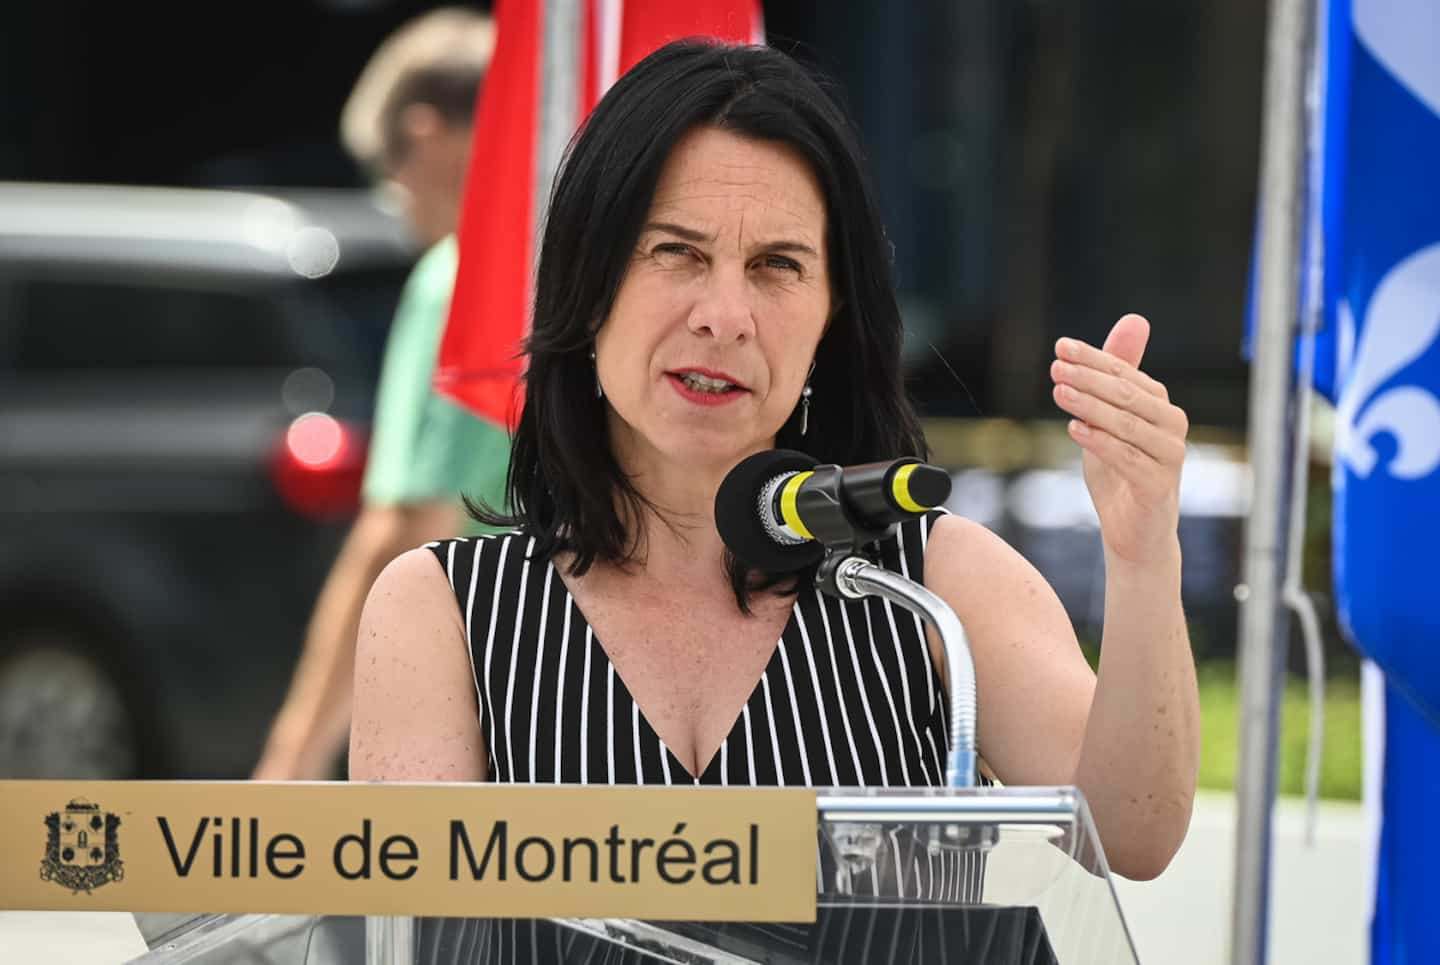 Right to abortion: American women "always welcome", says Valérie Plante